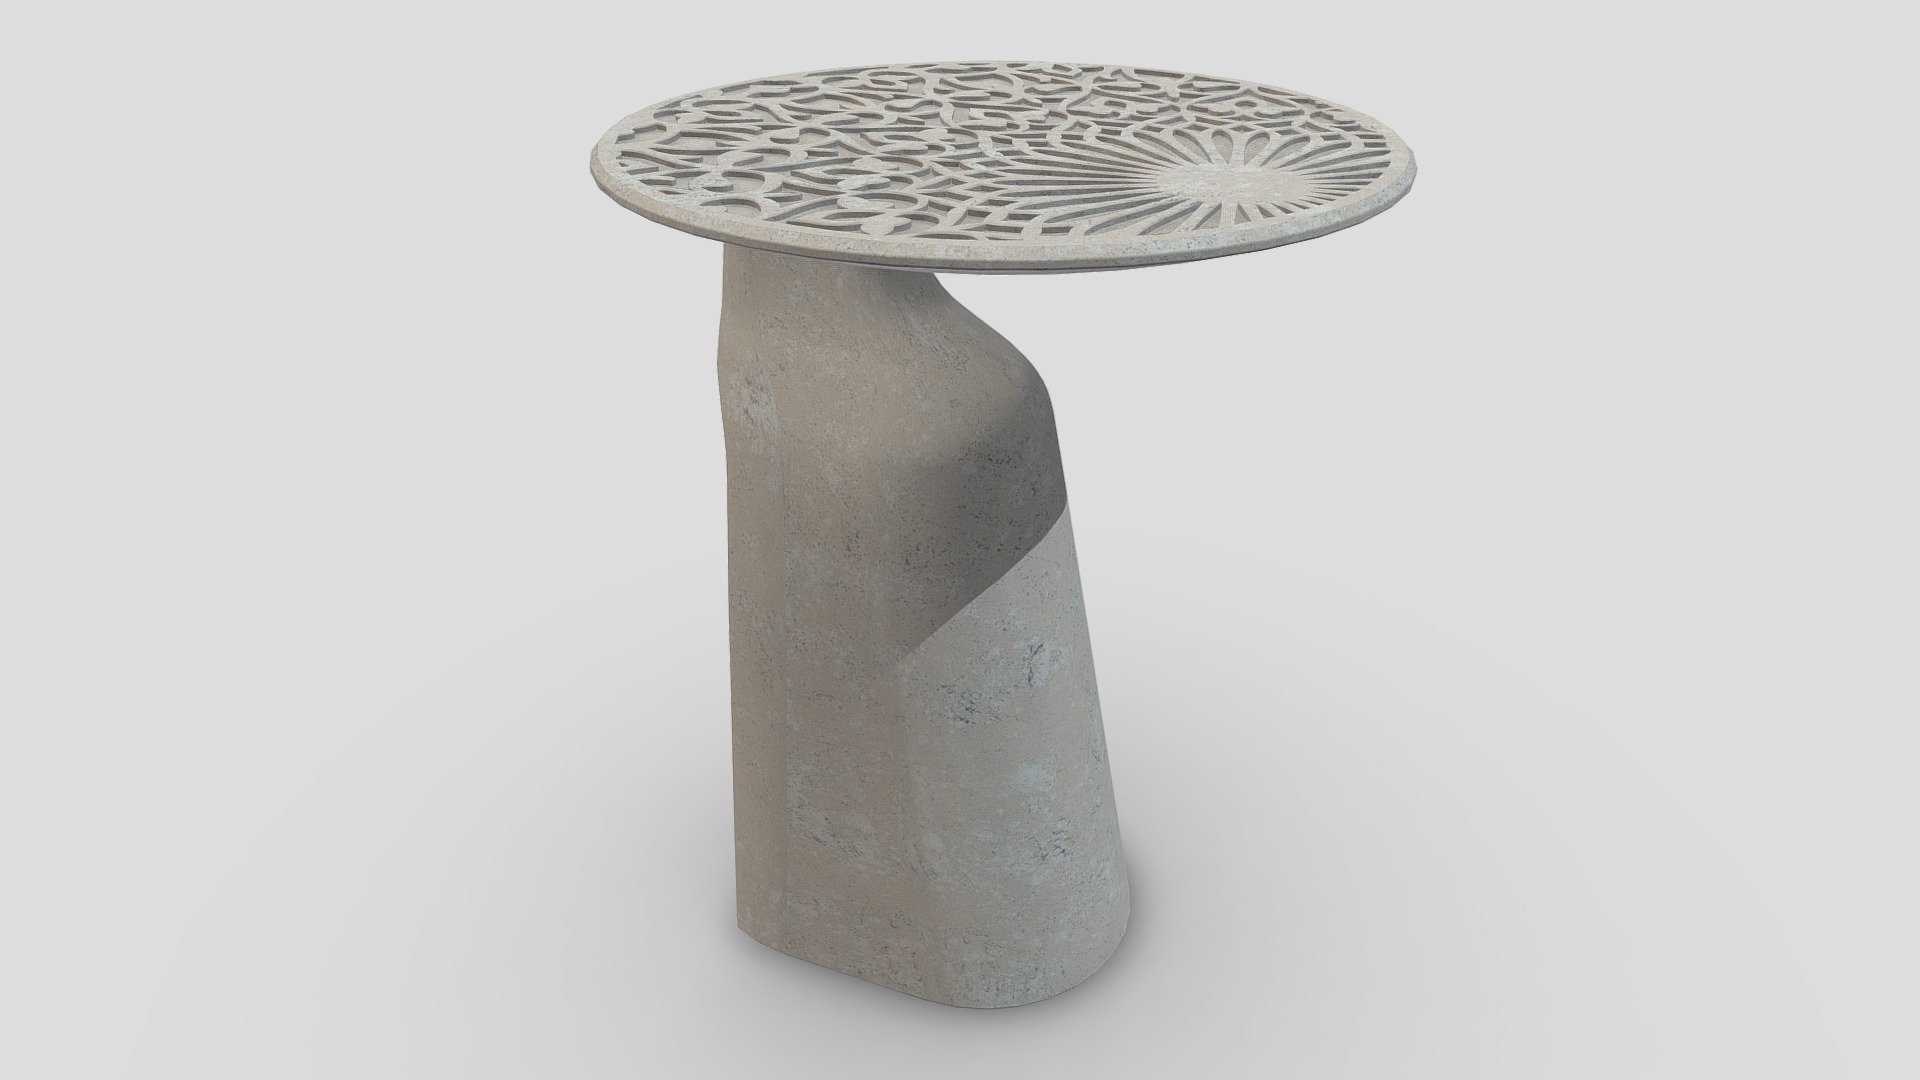 Outdoor engraved Concrete side table.

Dimensions: Diameter 500 mm Height 650 mm. The model is highly accurate and based on the manufacturers original dimensions and technical data 3d model